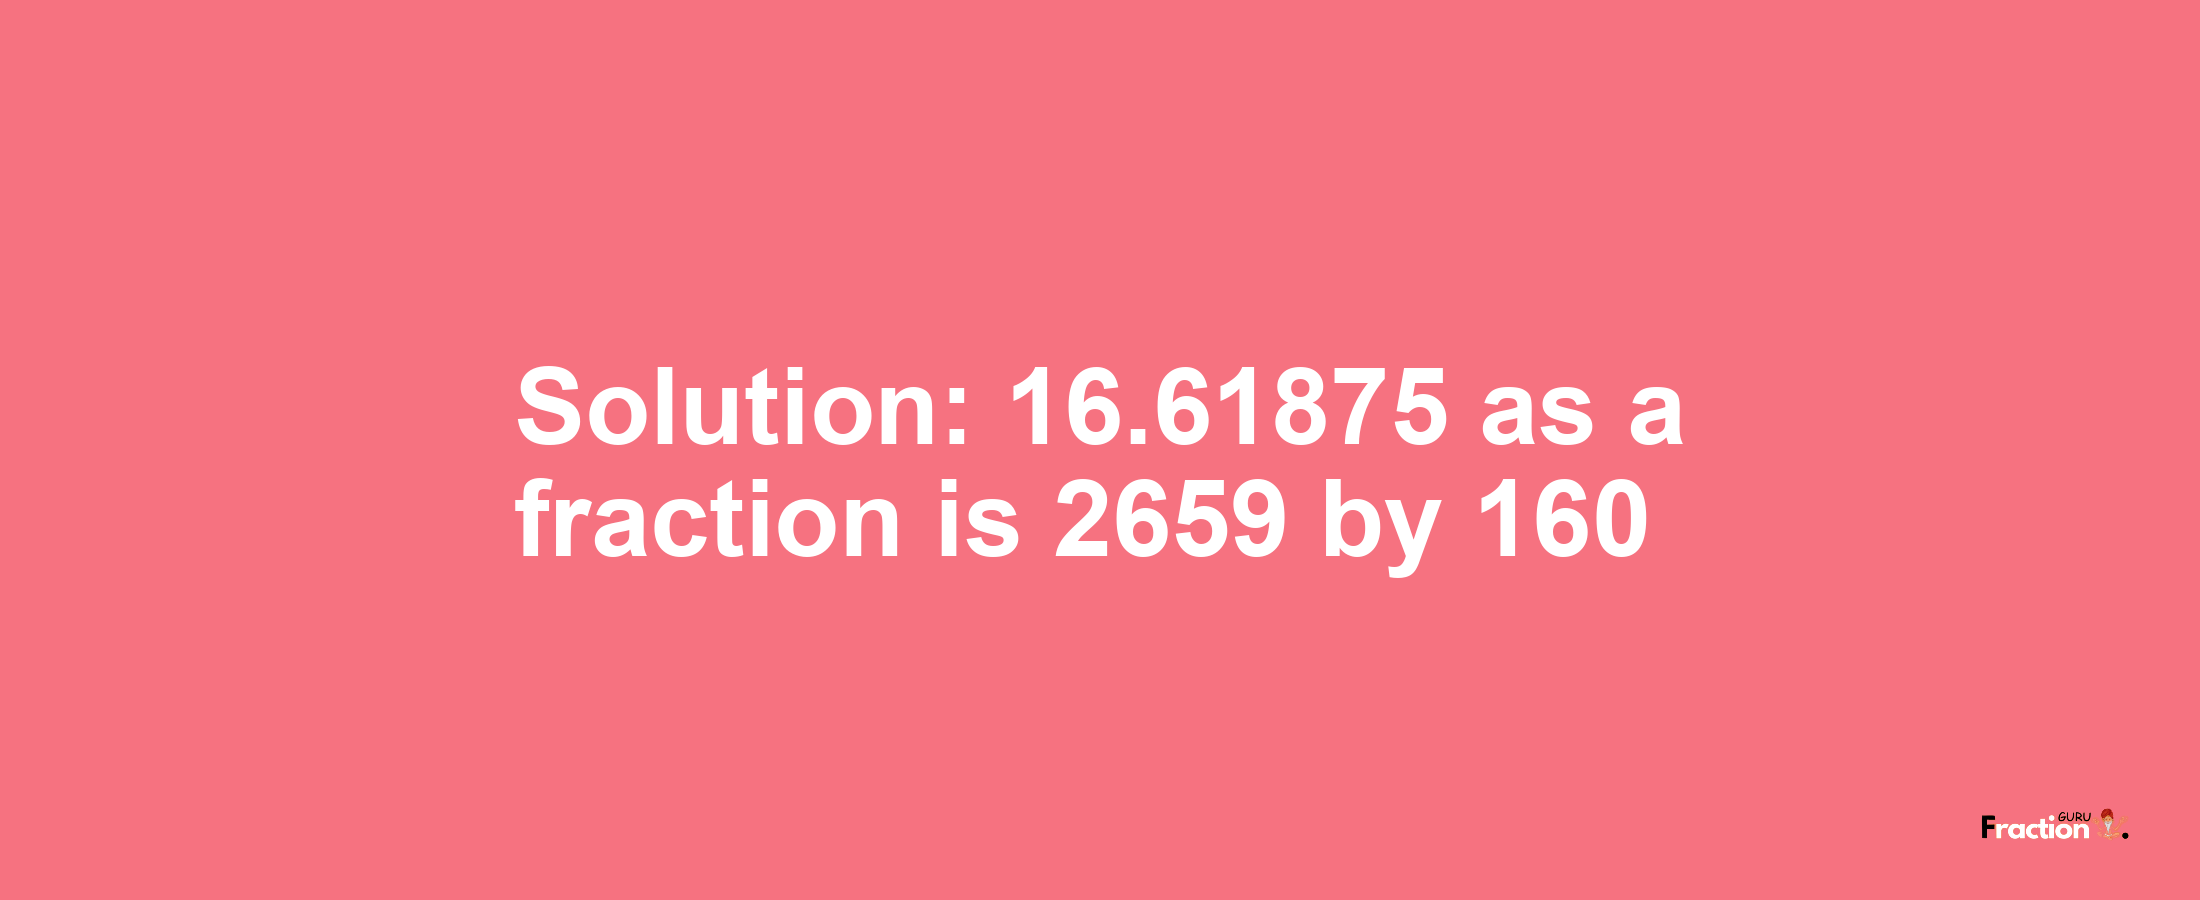 Solution:16.61875 as a fraction is 2659/160